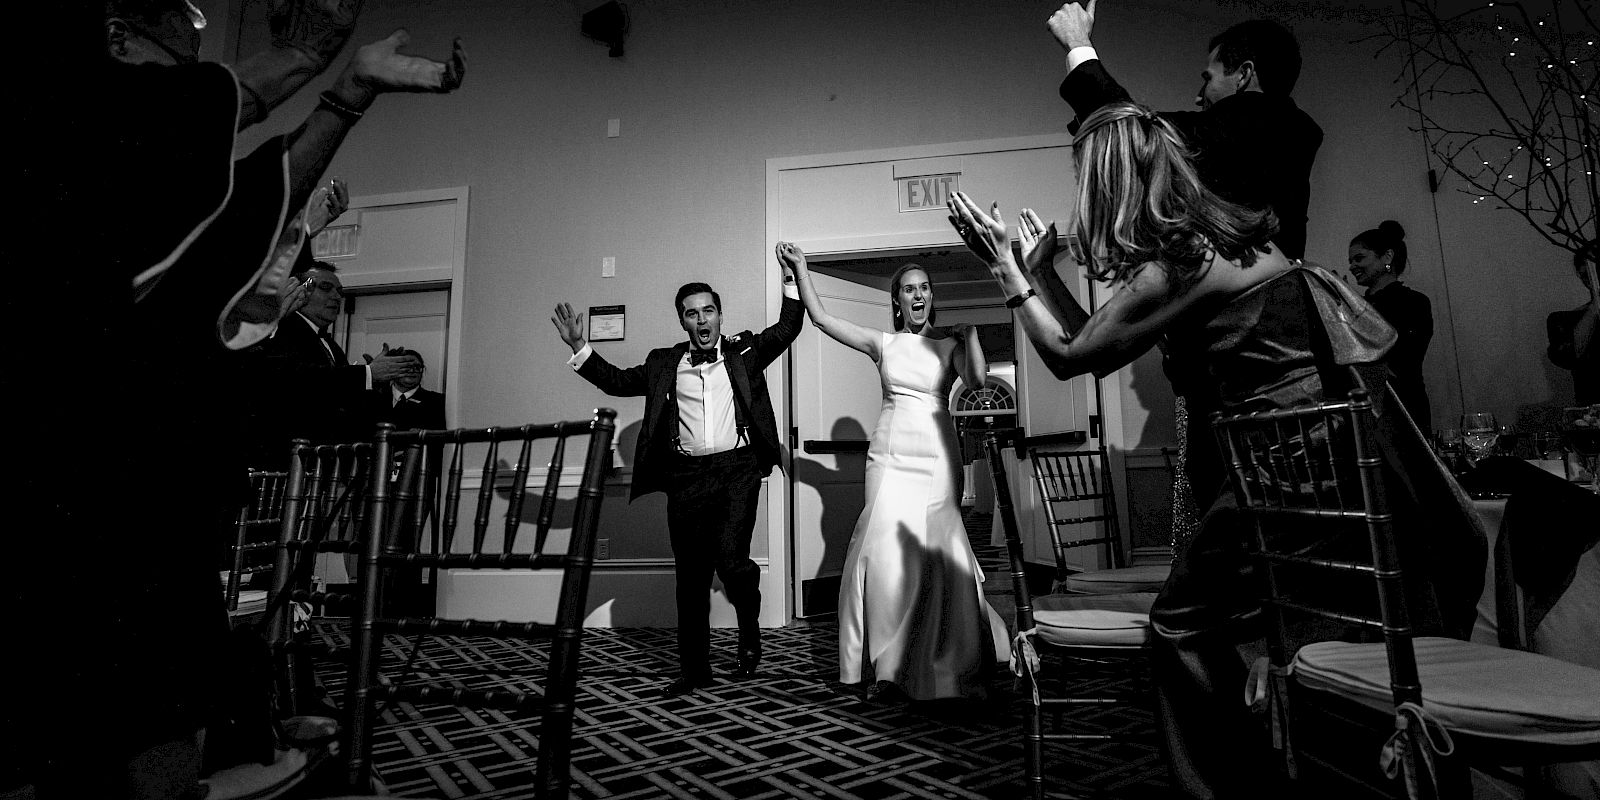 A newlywed couple is joyfully entering a reception hall, surrounded by cheering guests, all dressed formally with raised arms, in a black and white photo.